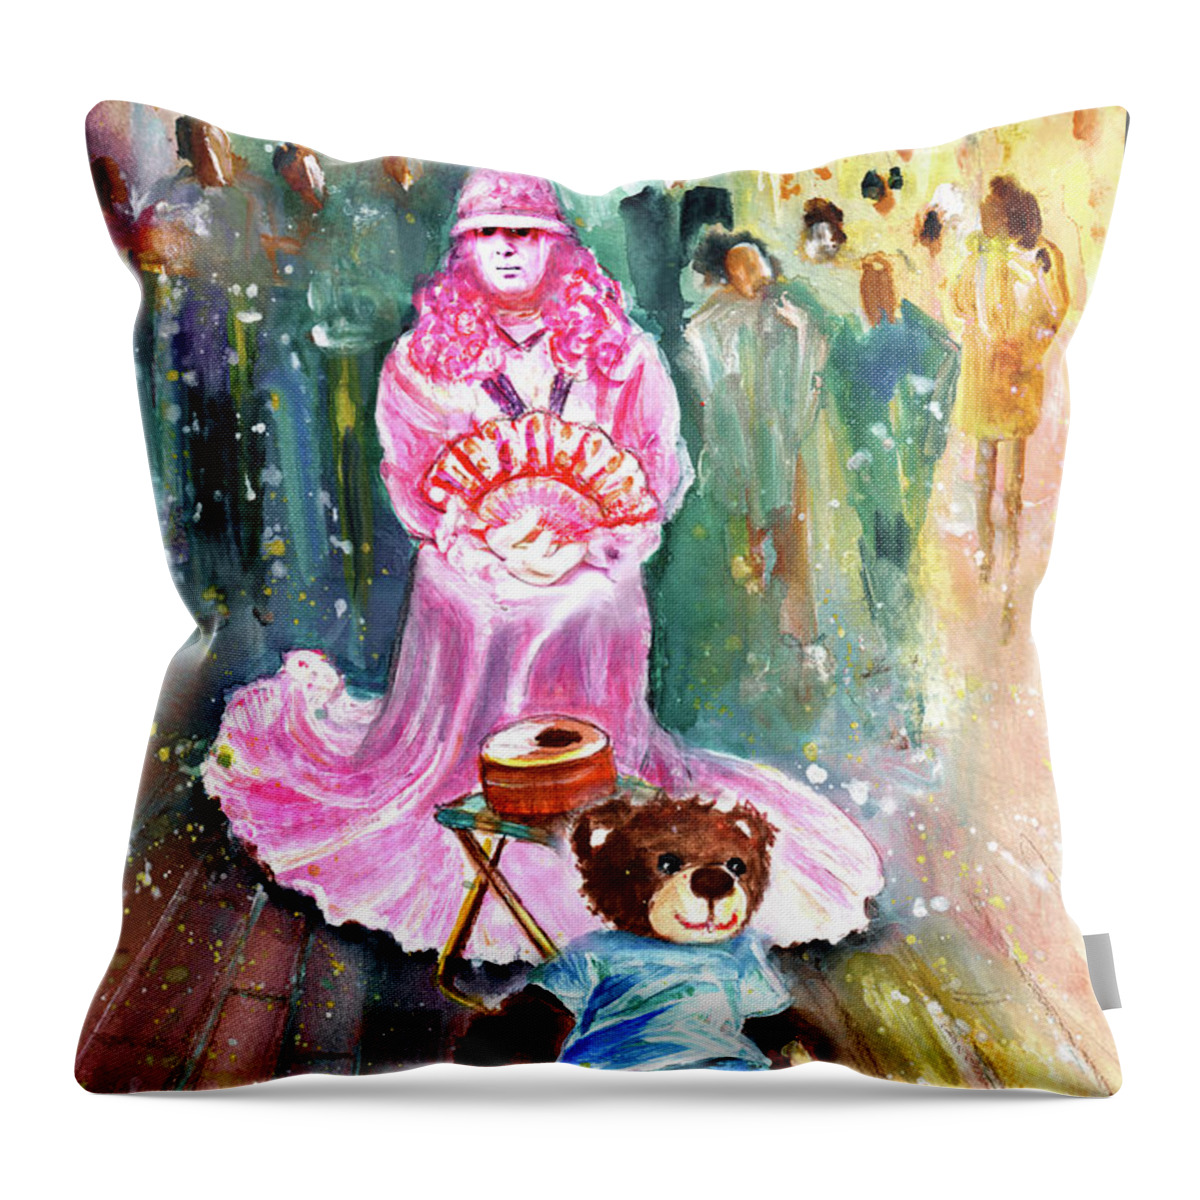 Truffle Mcfurry Throw Pillow featuring the painting The Mime From Benidorm by Miki De Goodaboom